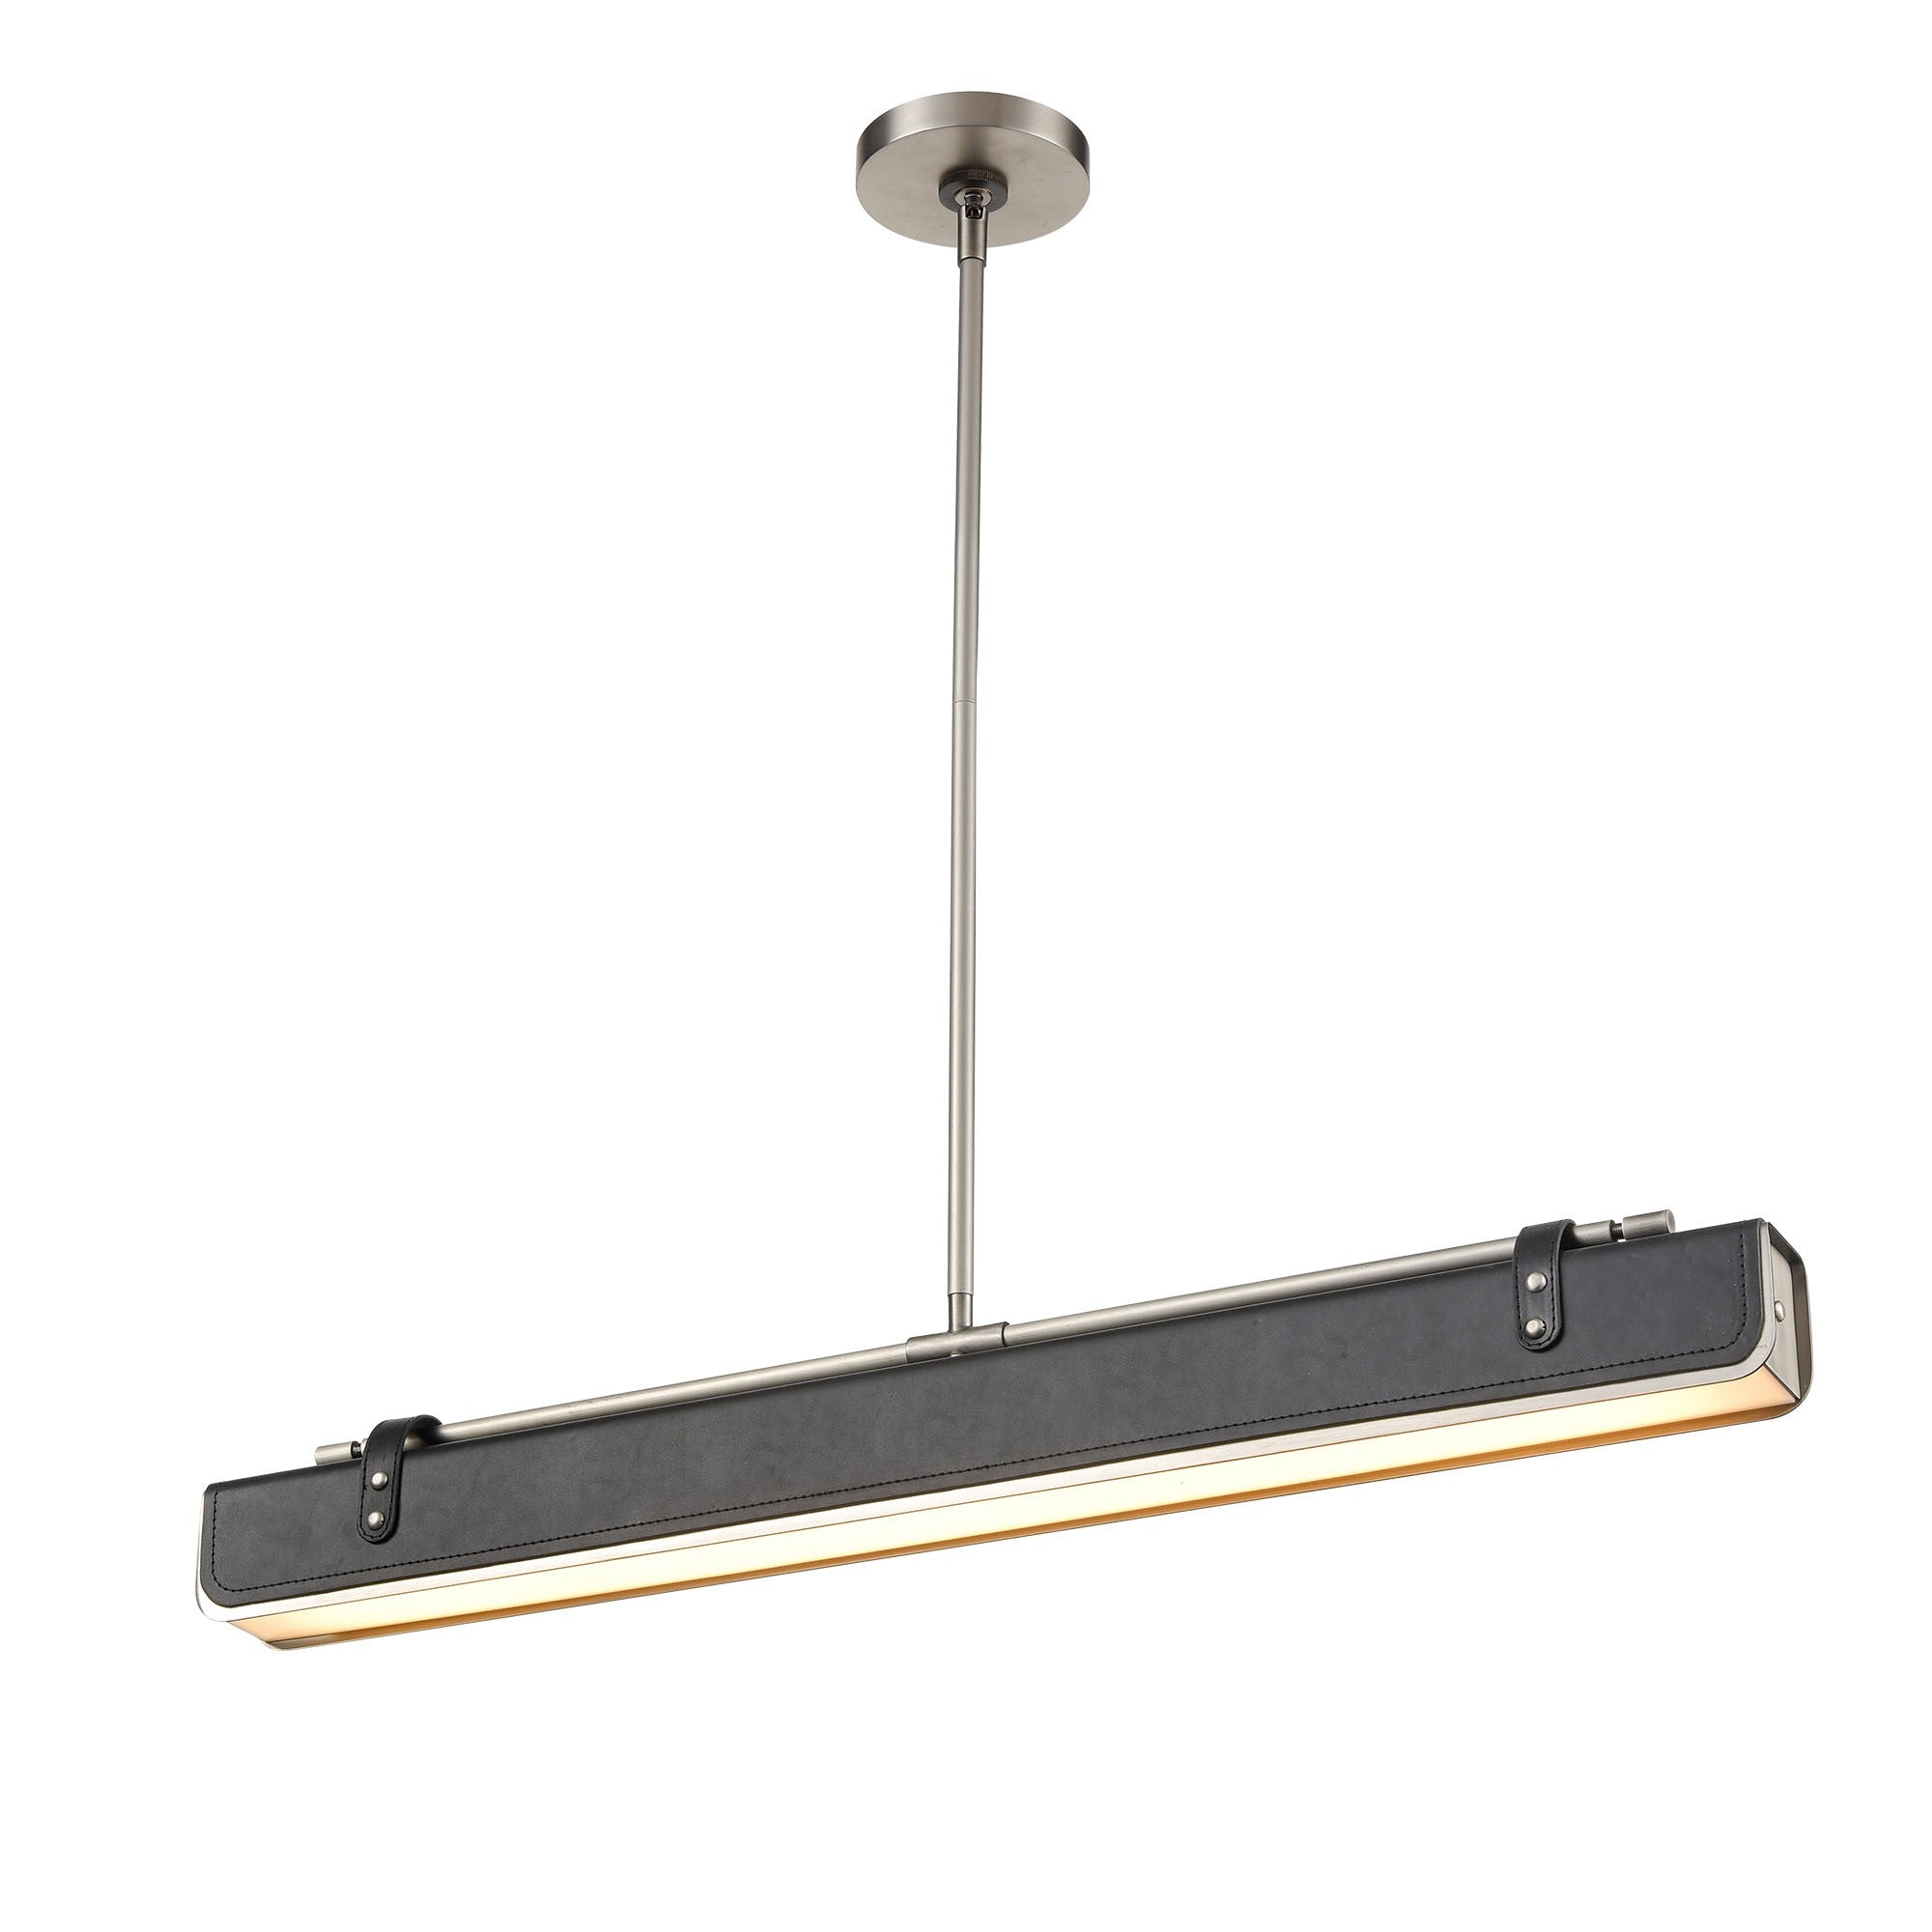 Valise Linear Suspension